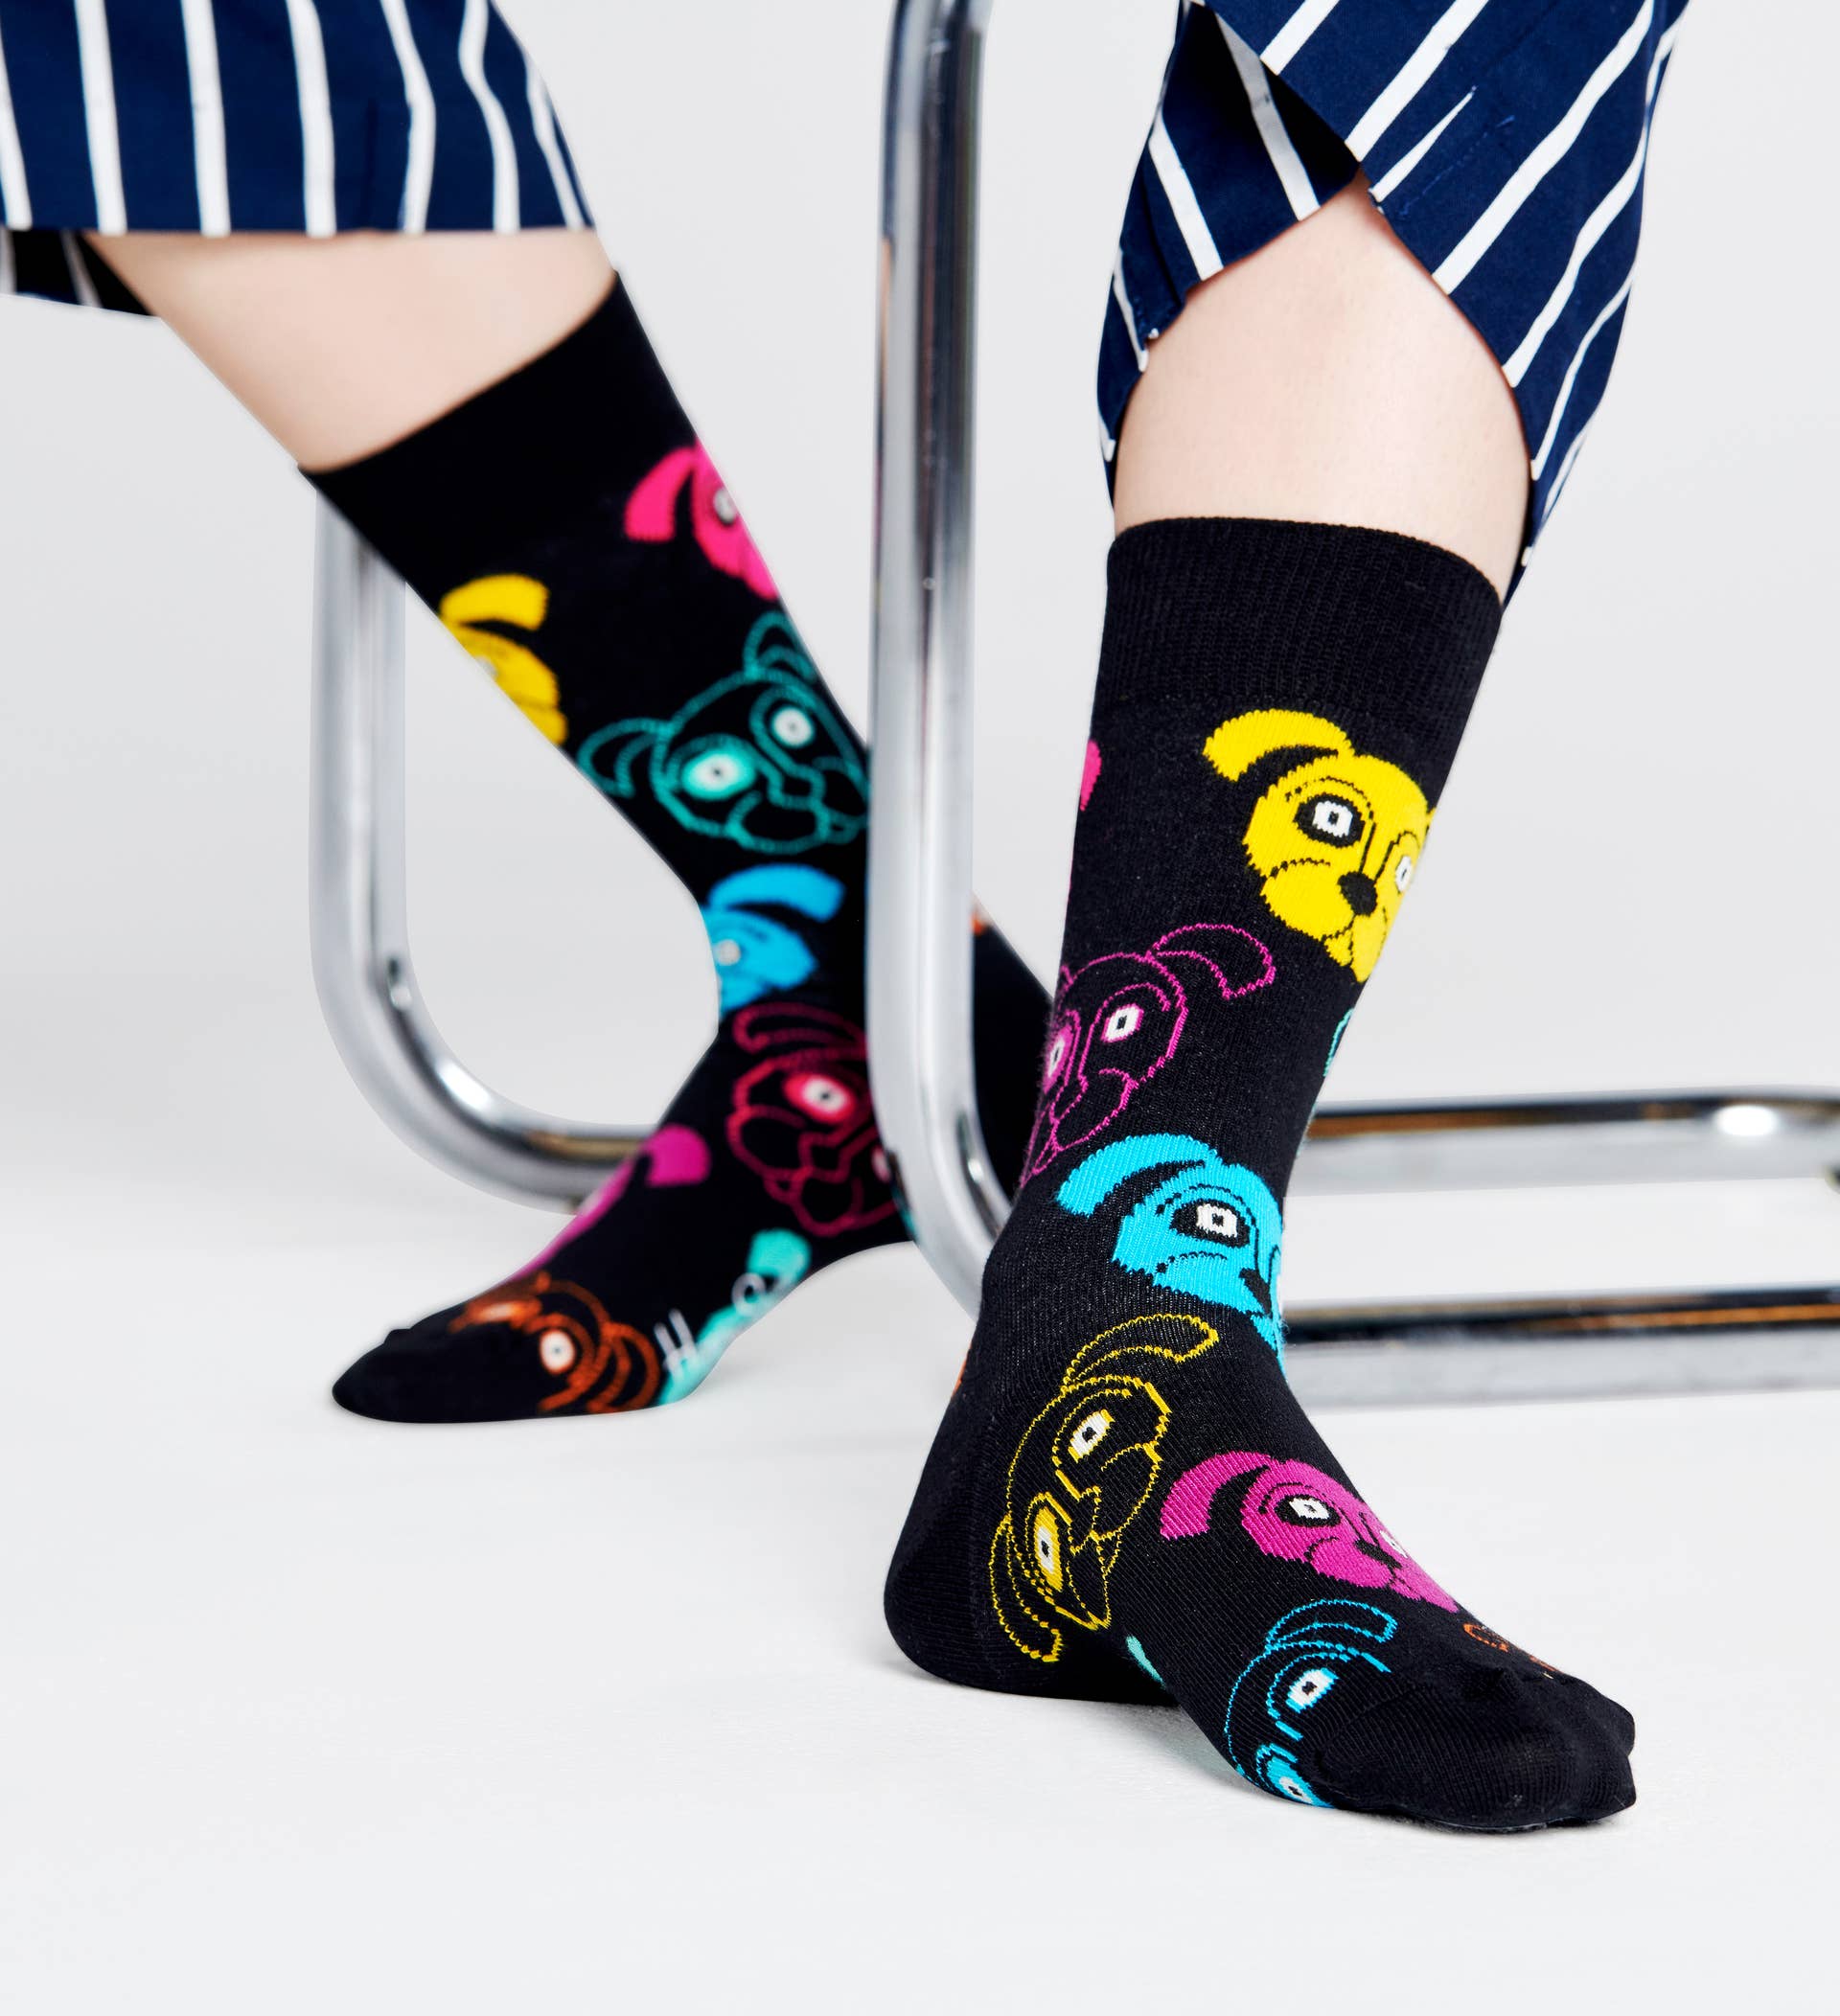 Happy Socks DOG01-9001 Dog Sock - Black cotton socks with multicoloured cartoon dog faces pattern. Available in men and women's sizes.